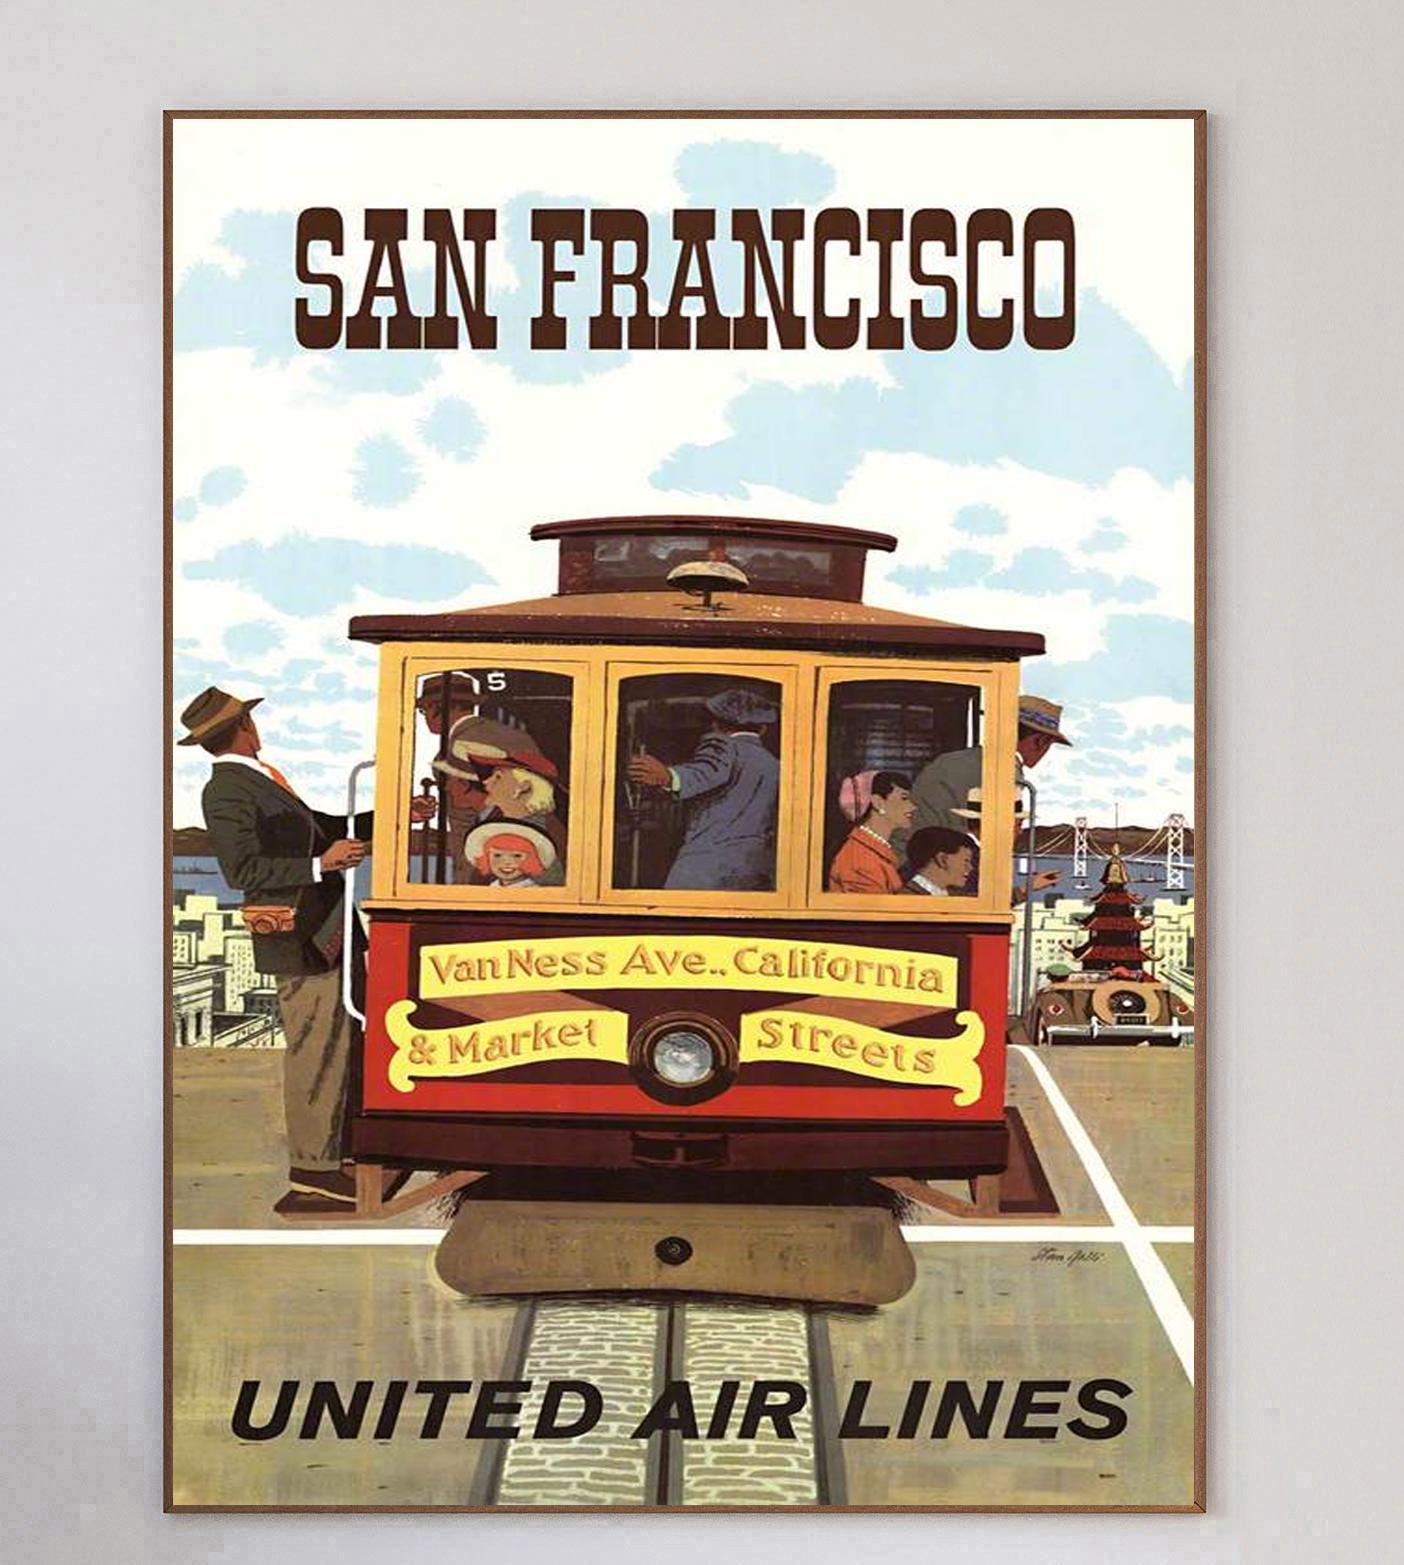 With artwork from the great poster designer and illustrator Stan Galli, this stunning and rare poster from 1960 promotes United Airlines routes to San Francisco. Depicting the iconic San Francisco Streetcar riding up Van Ness Ave. and Market Street